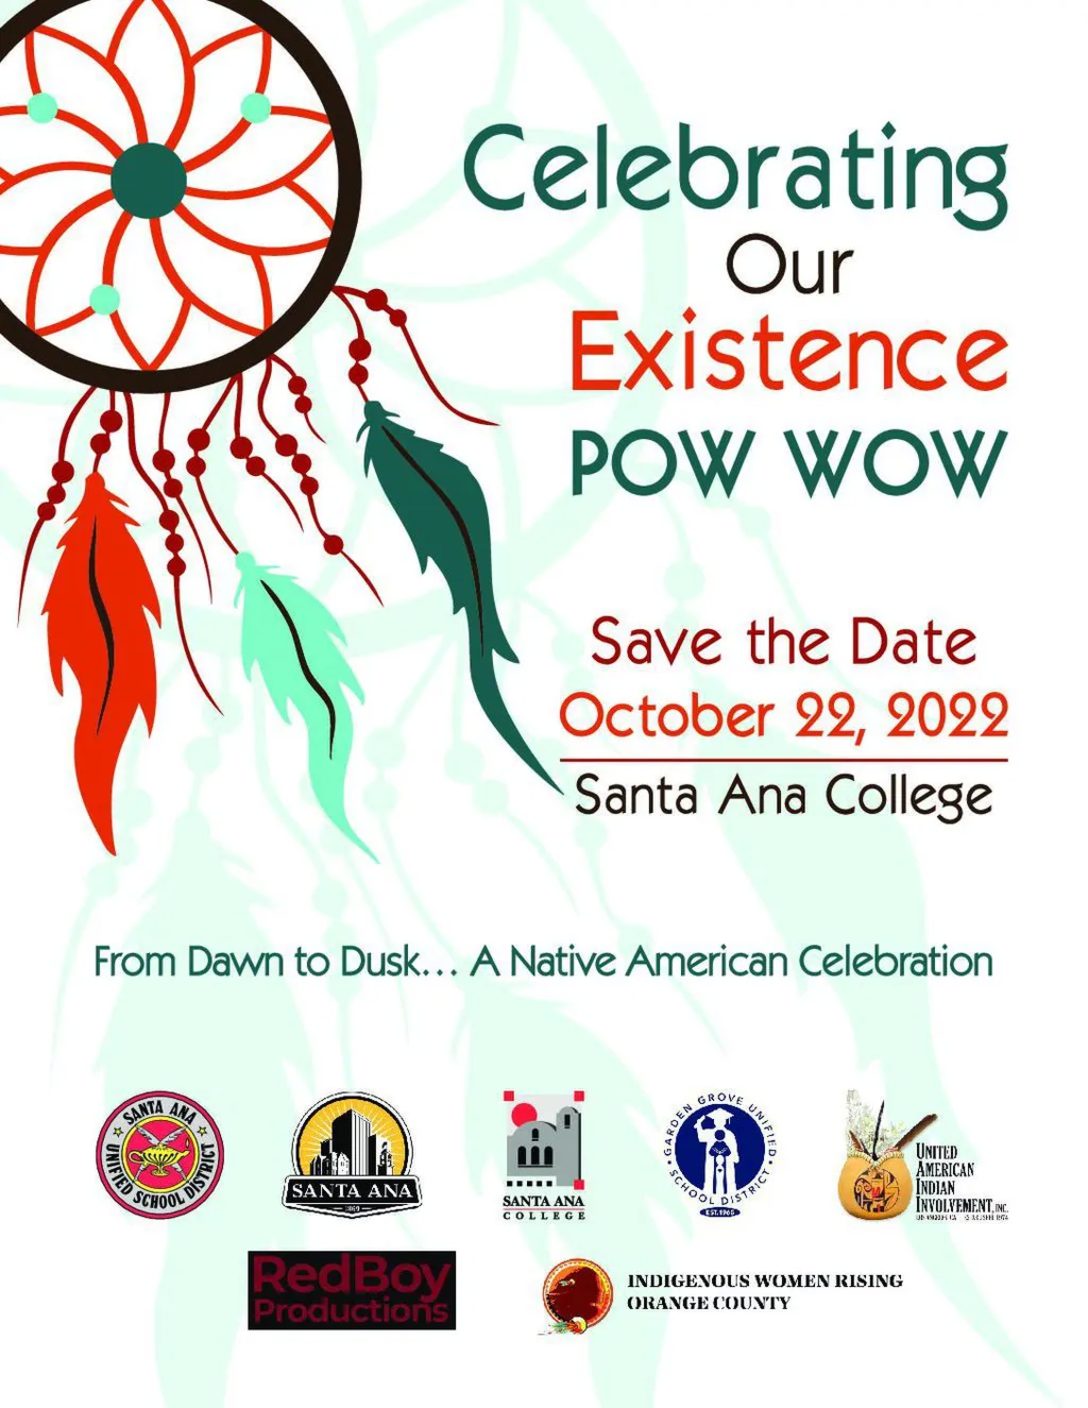 Celebrating Our Existence Powwow News from Native California